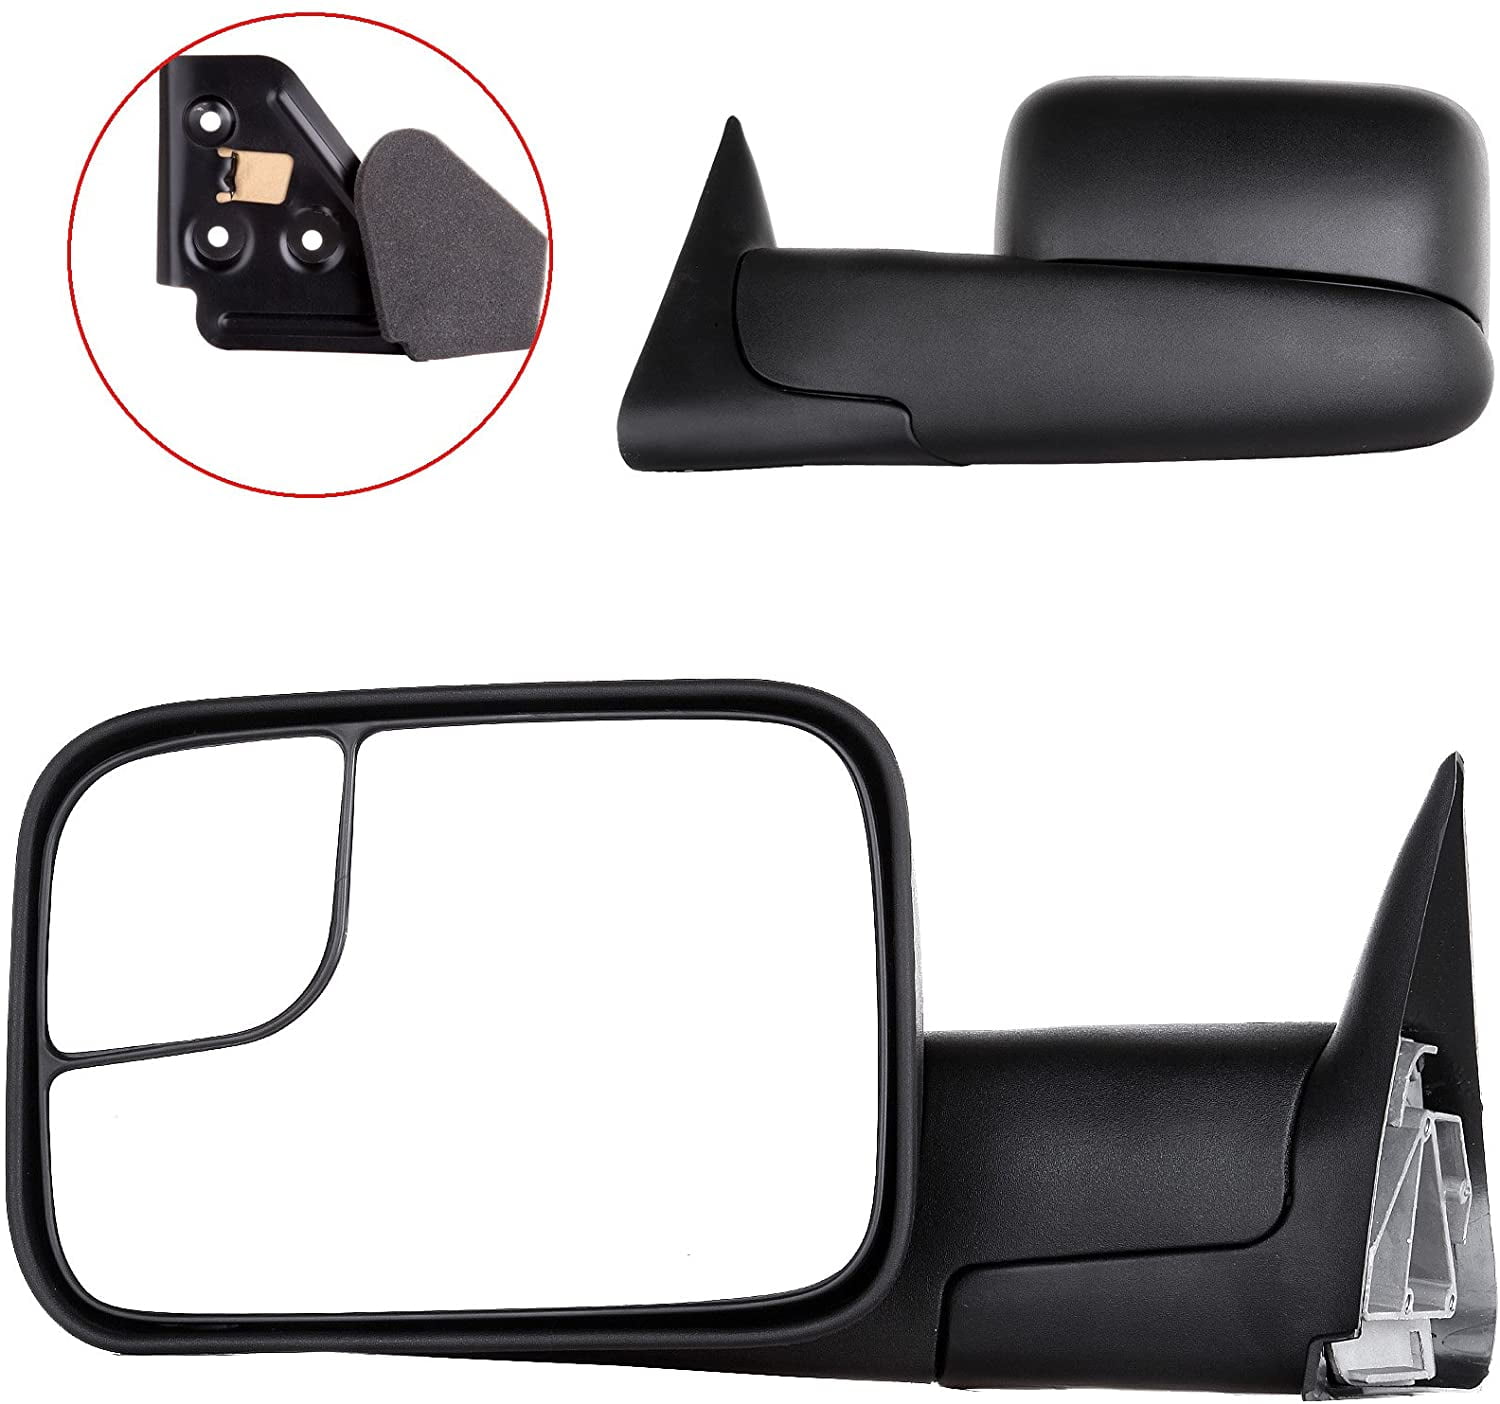 ECCPP Towing Mirror Replacement fit Dodge 94-01 Ram 1500 94-02 Ram 2500 3500 Pickup Truck Manual Towing Tow Mirror Left Driver and Right Passenger Pair Set Fits 60177-78C Side Mirror 